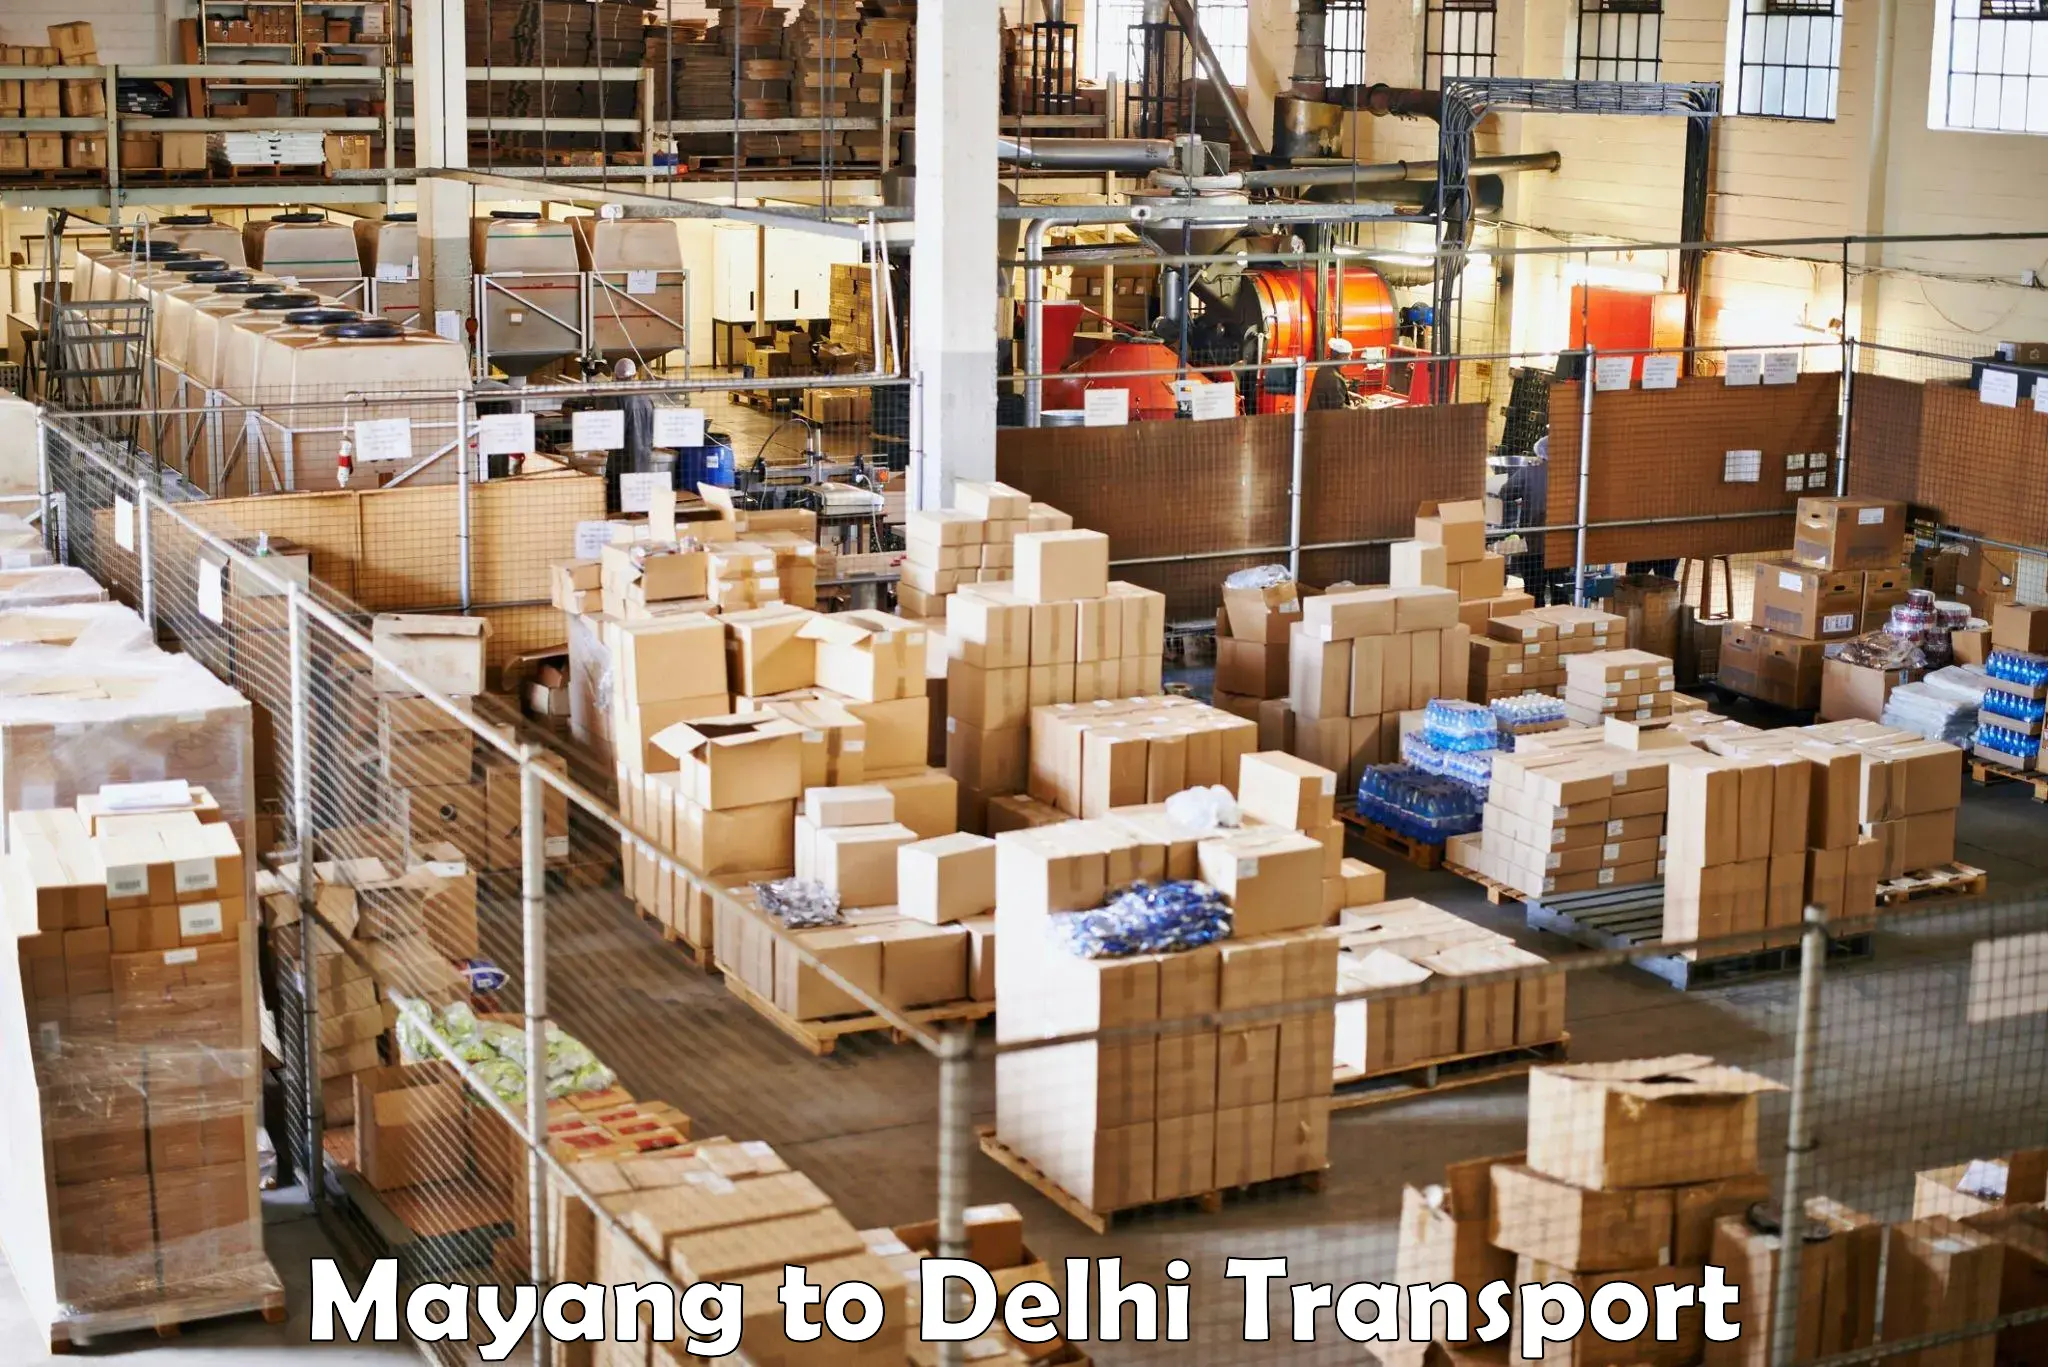 Lorry transport service Mayang to Delhi